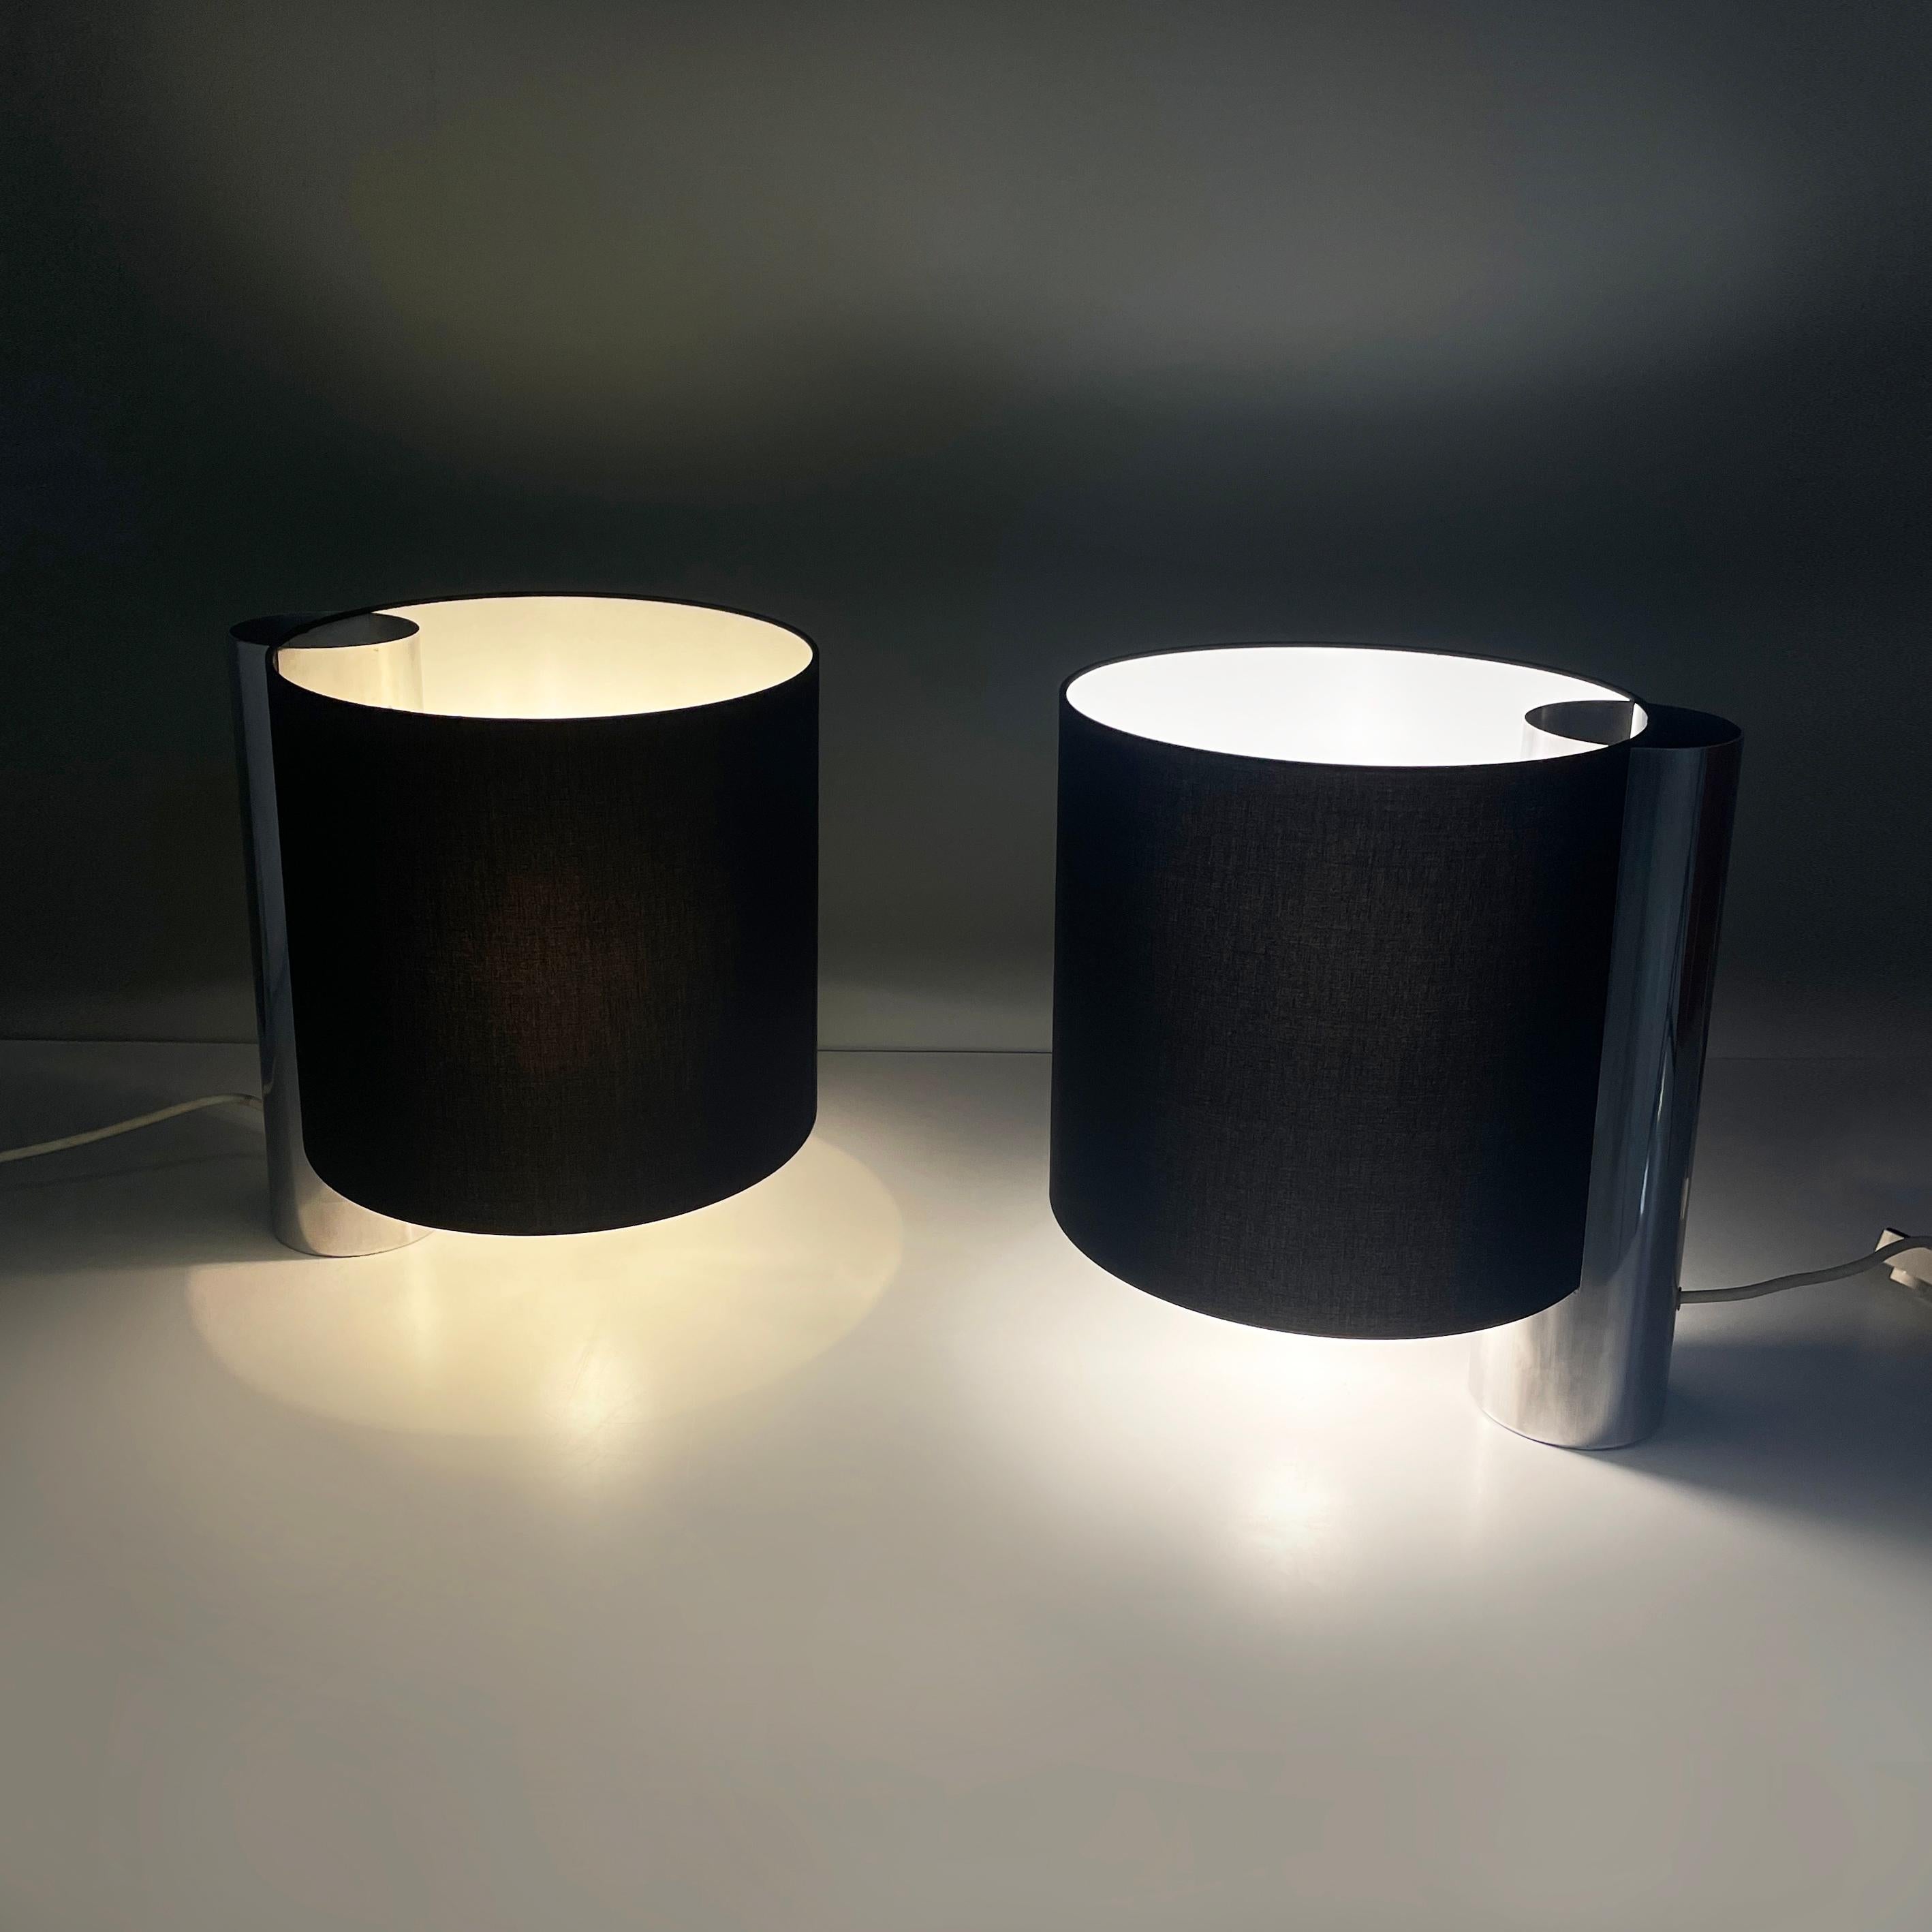 Italian modern Table lamps Fluette by Giuliana Gramigna for Quattrifolio, 1970s
Pair of table lamps mod. Fluette with double bulb and cylindrical lampshade black externally and white internally fabric.The cylindrical metal structure is positioned